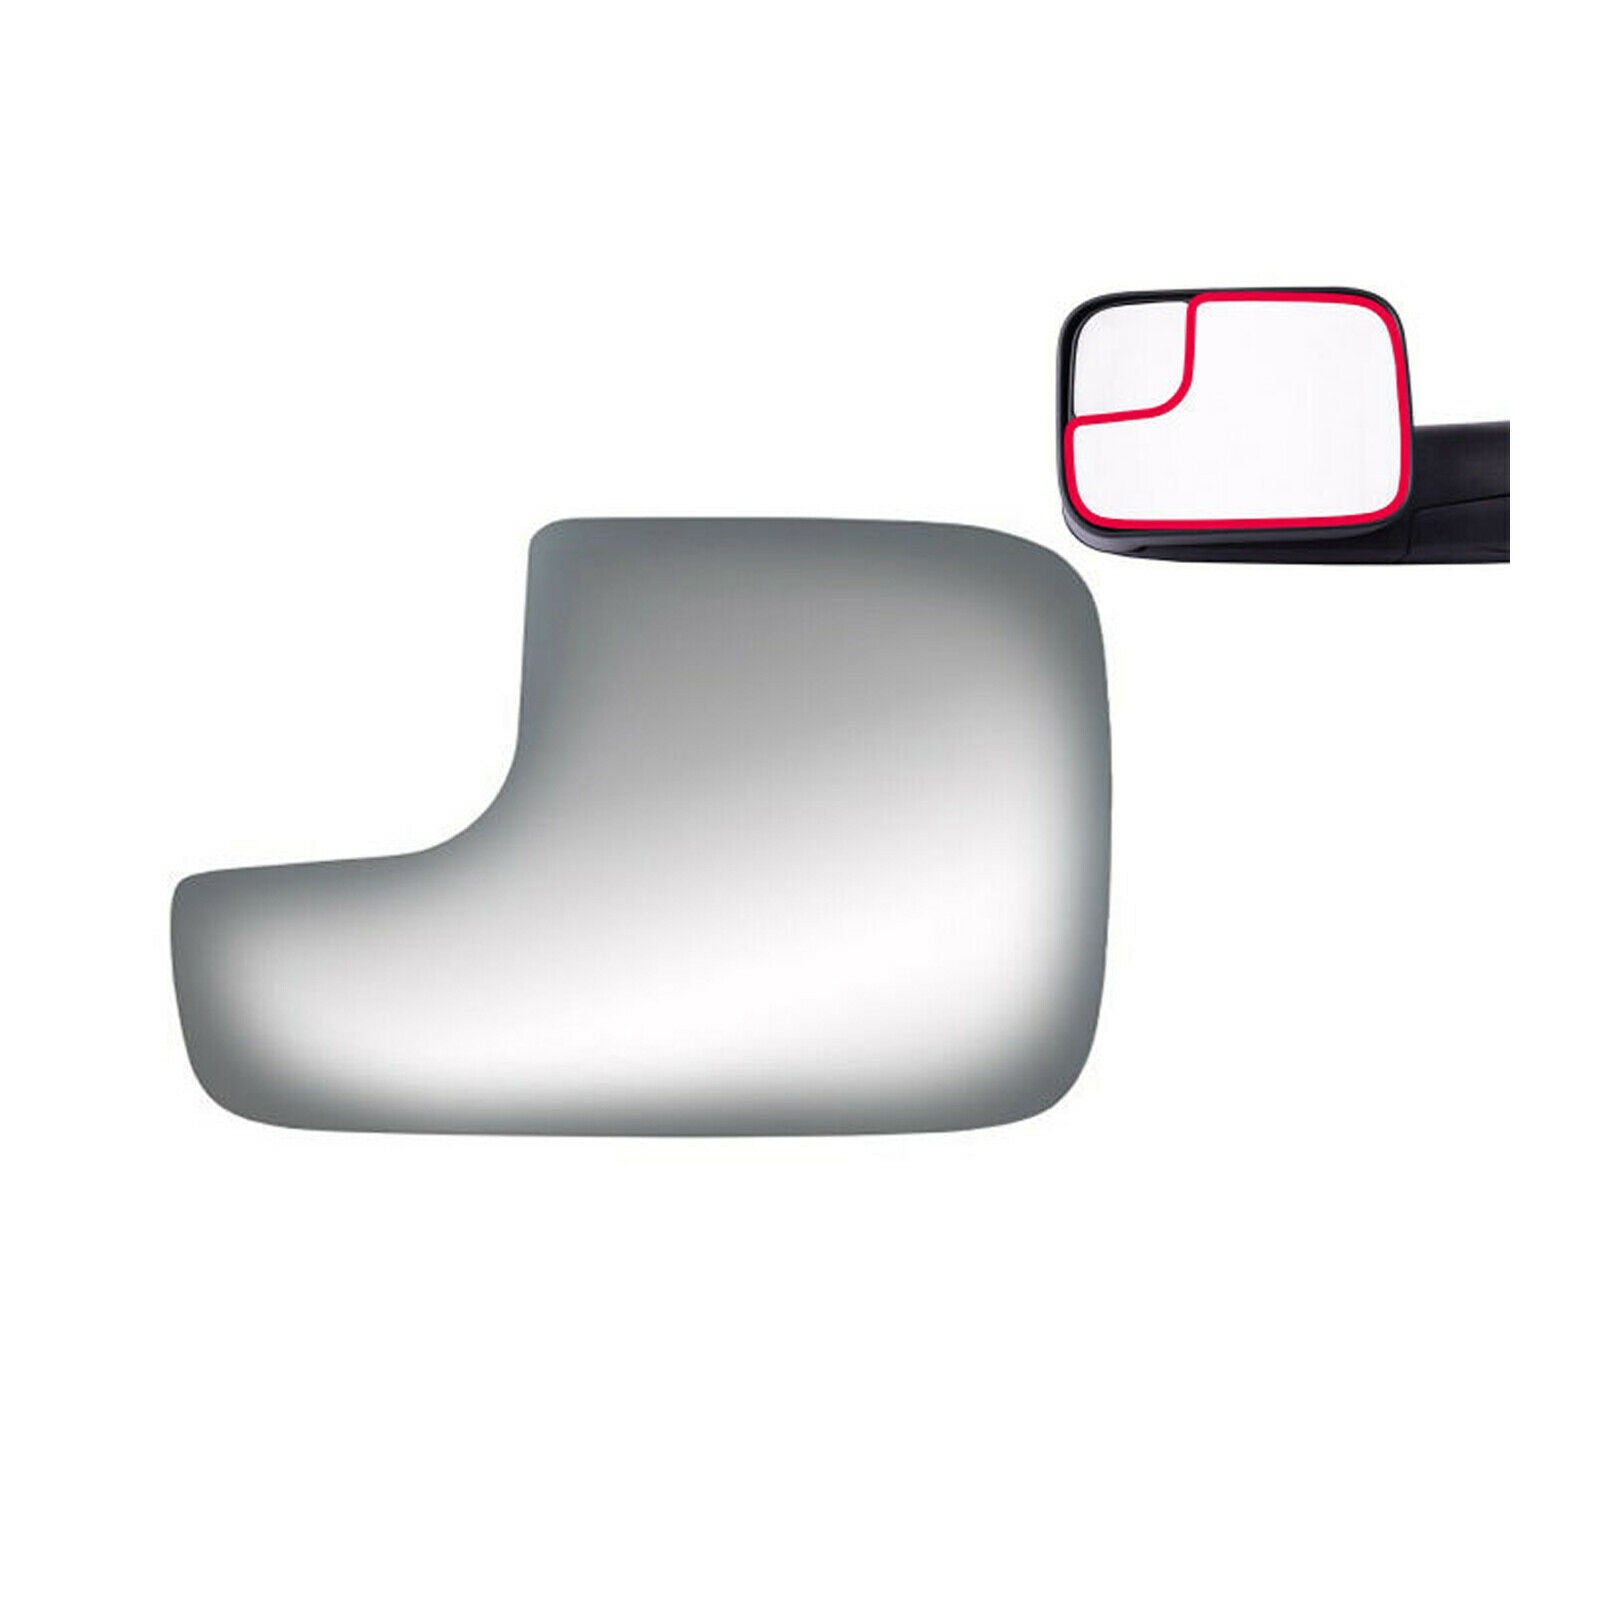 WLLW Towing Mirror Glass Replacement for 1994-2009 Dodge Ram Pickup Full Size, Driver Left Side LH/Passenger Right Side RH/The Both Sides Flat M-0014